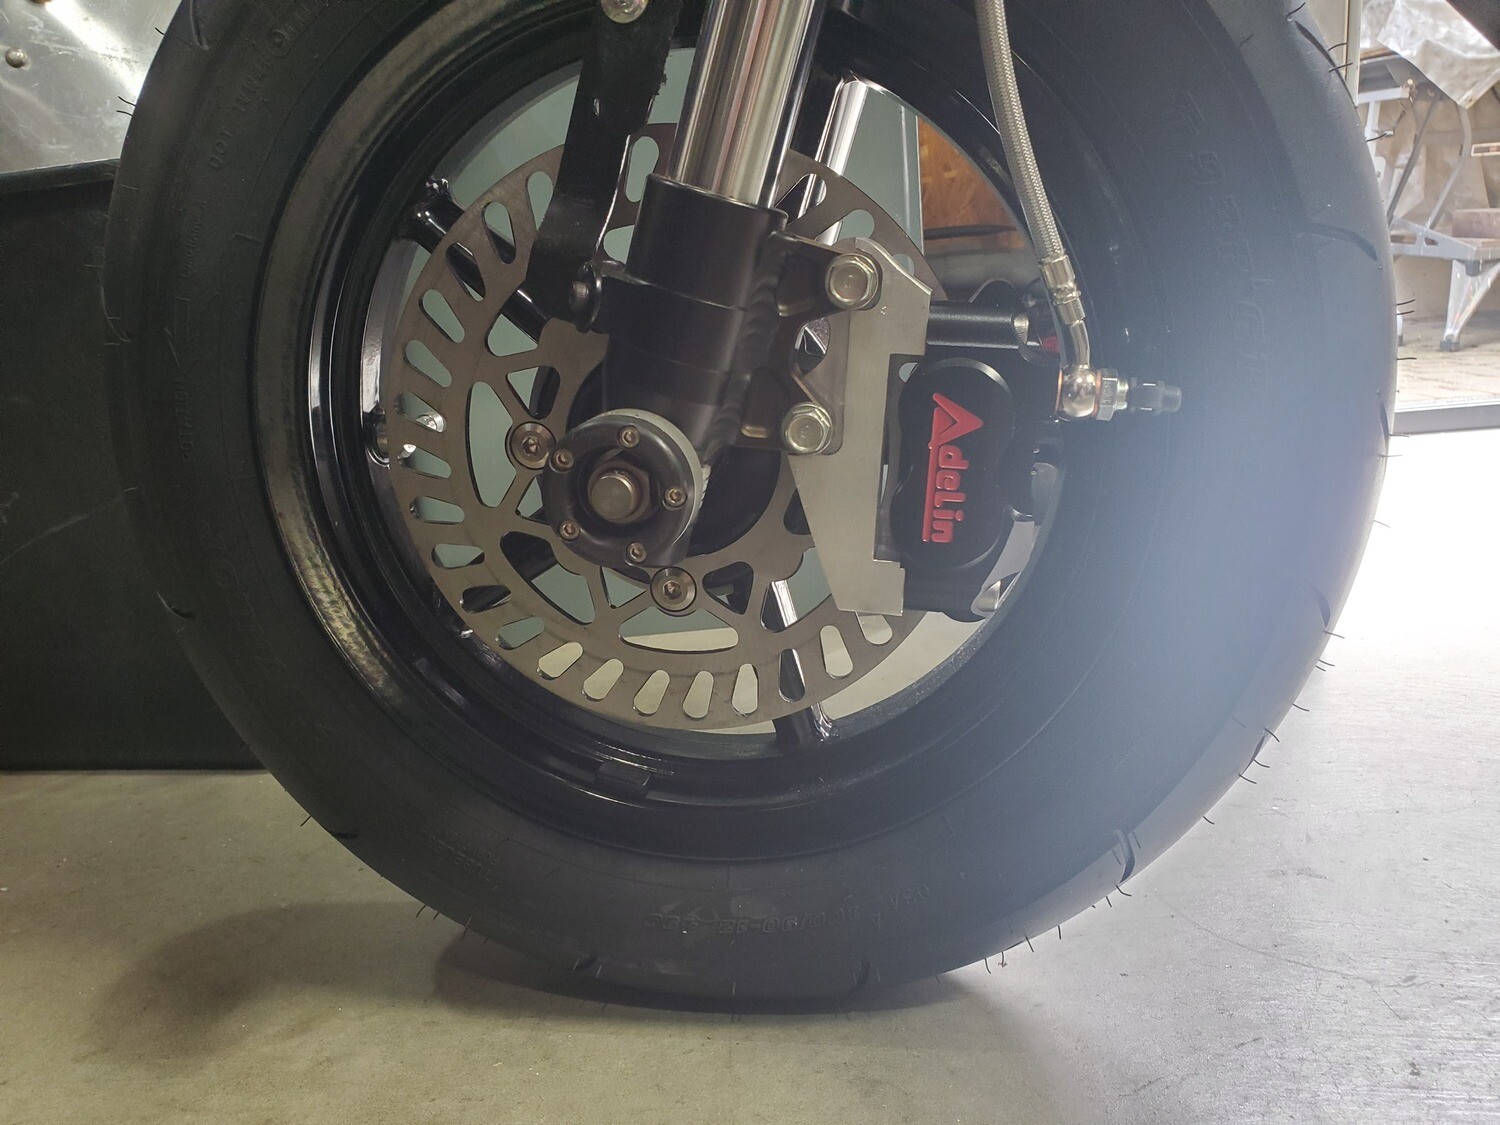 KAYO - SVRP Sets of Black MiniGP Wheels for MR150R: 2.5 Front and 3.0 Rear - Light Weight